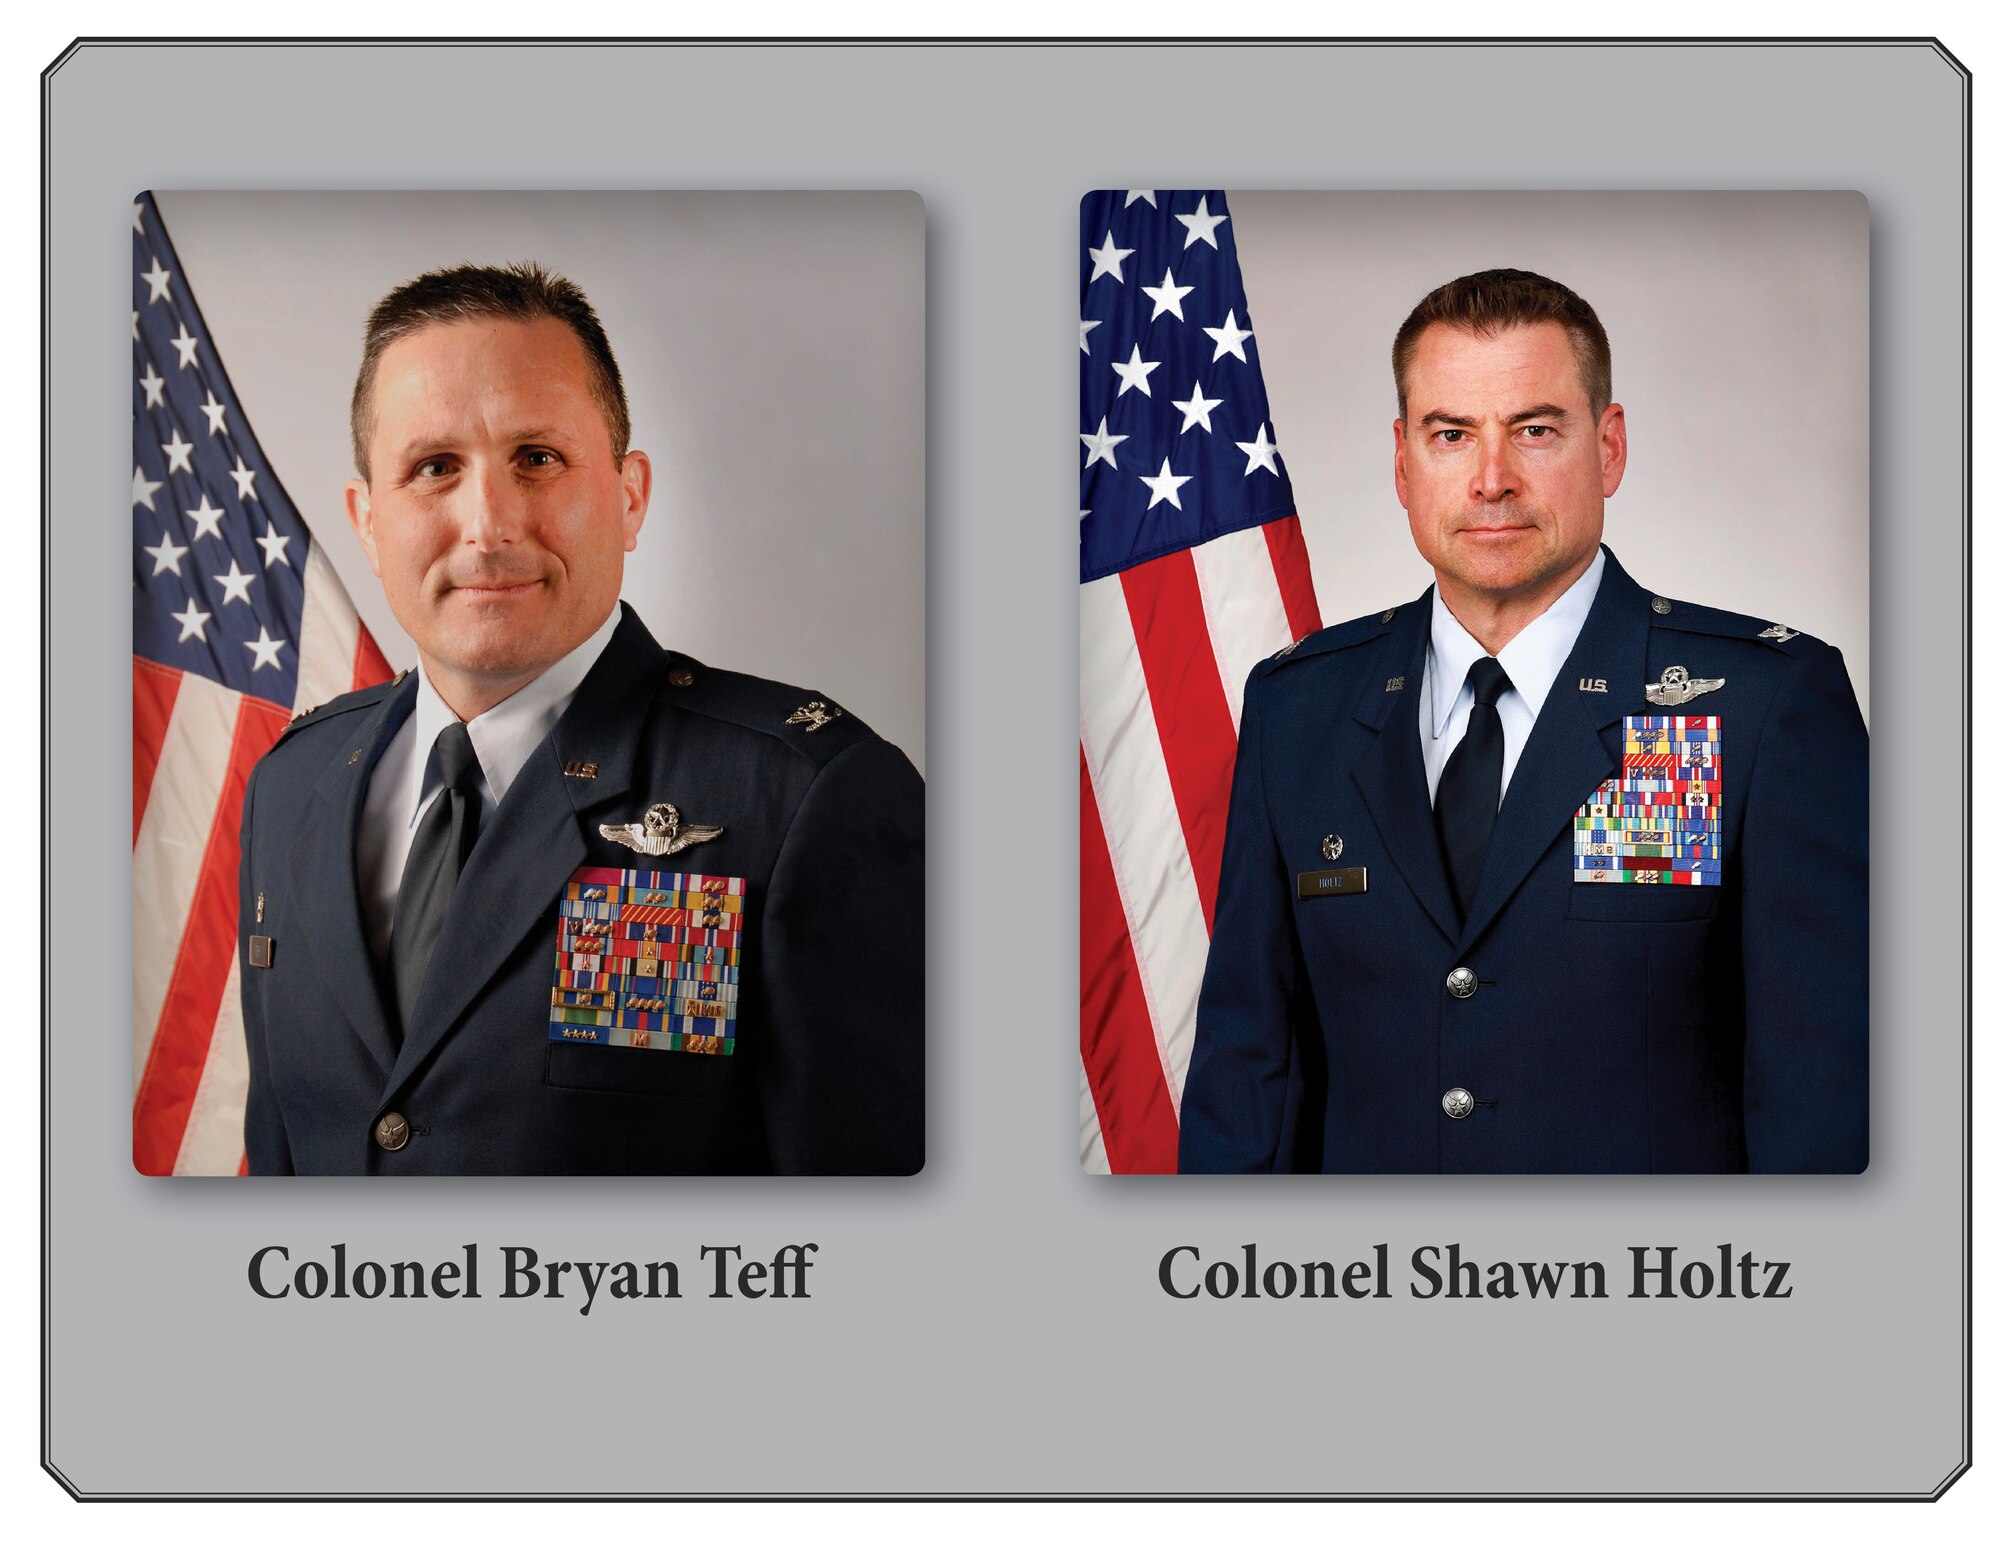 Col. Shawn Holtz will assume command of the 110th Wing, Battle Creek Air National Guard Base, Mich., in an on-base ceremony June 8, 2019 at 2:00 p.m.